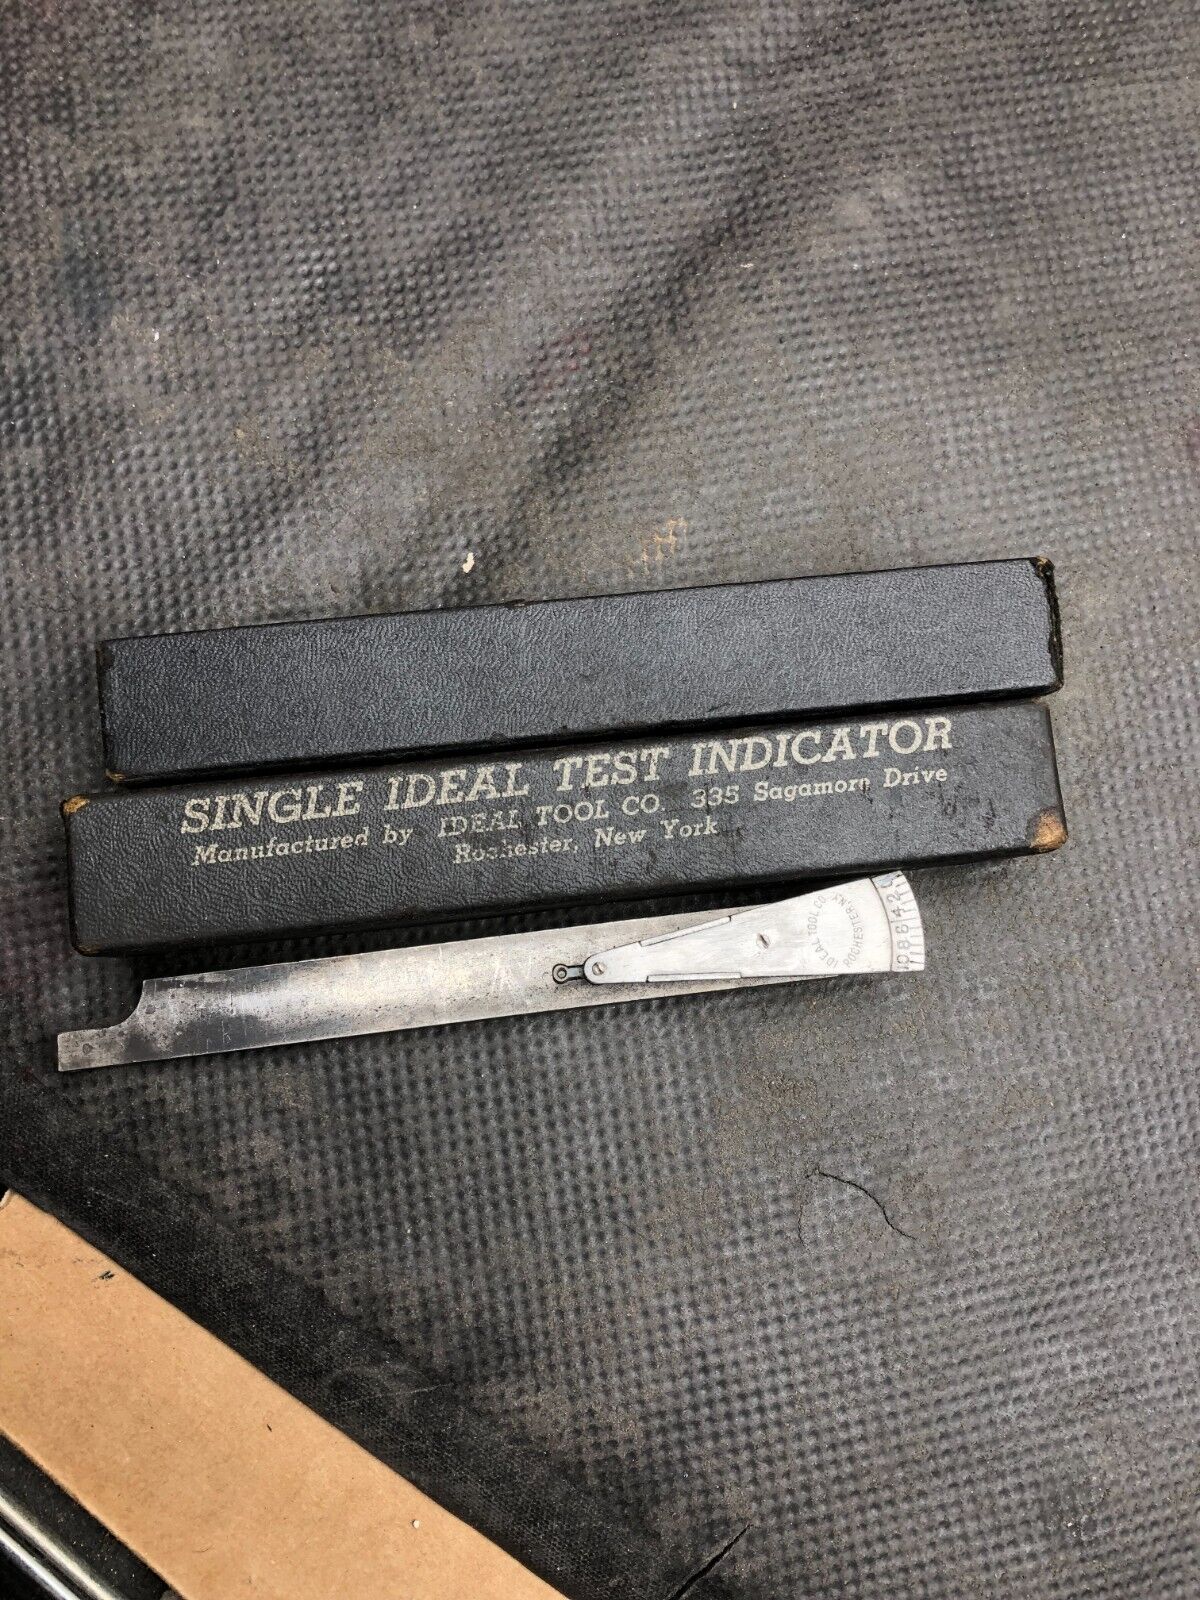 Single Ideal Test Indicator Ideal Tool Co. Rochester, N.Y. Machinist Tool USA 